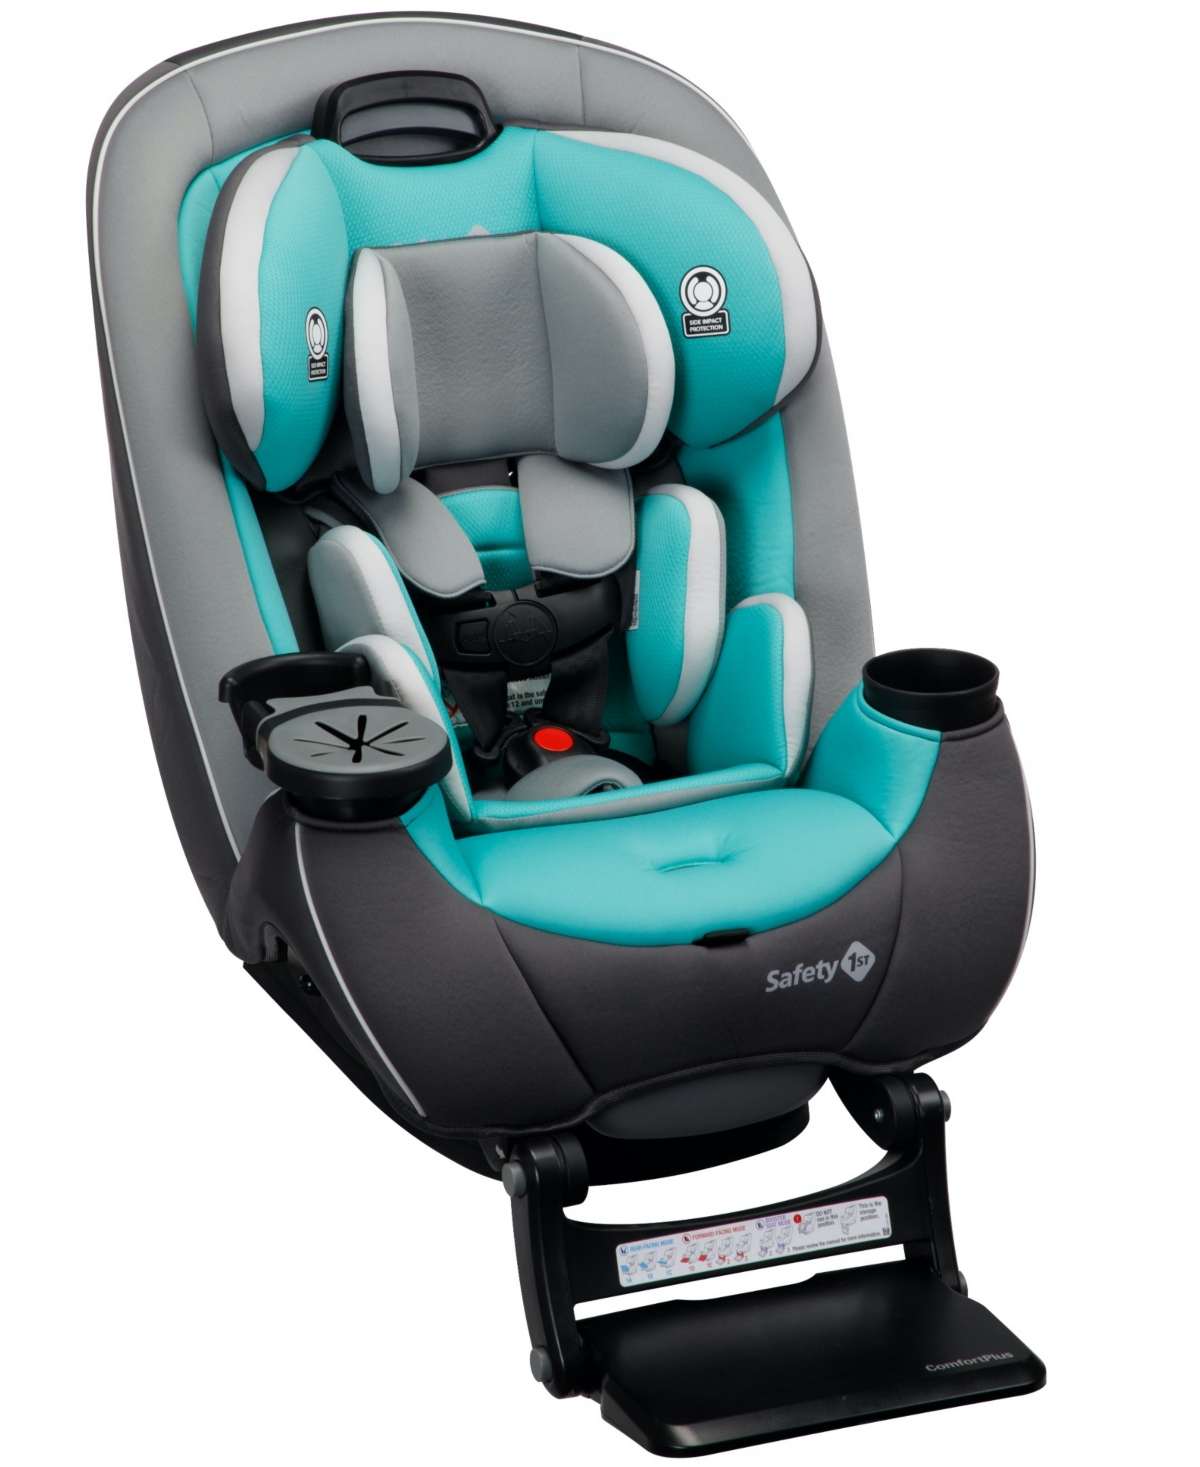 Safety 1st Baby Grow And Go Extend N Ride Lx Convertible One-hand Adjust Car Seat In Seas The Day